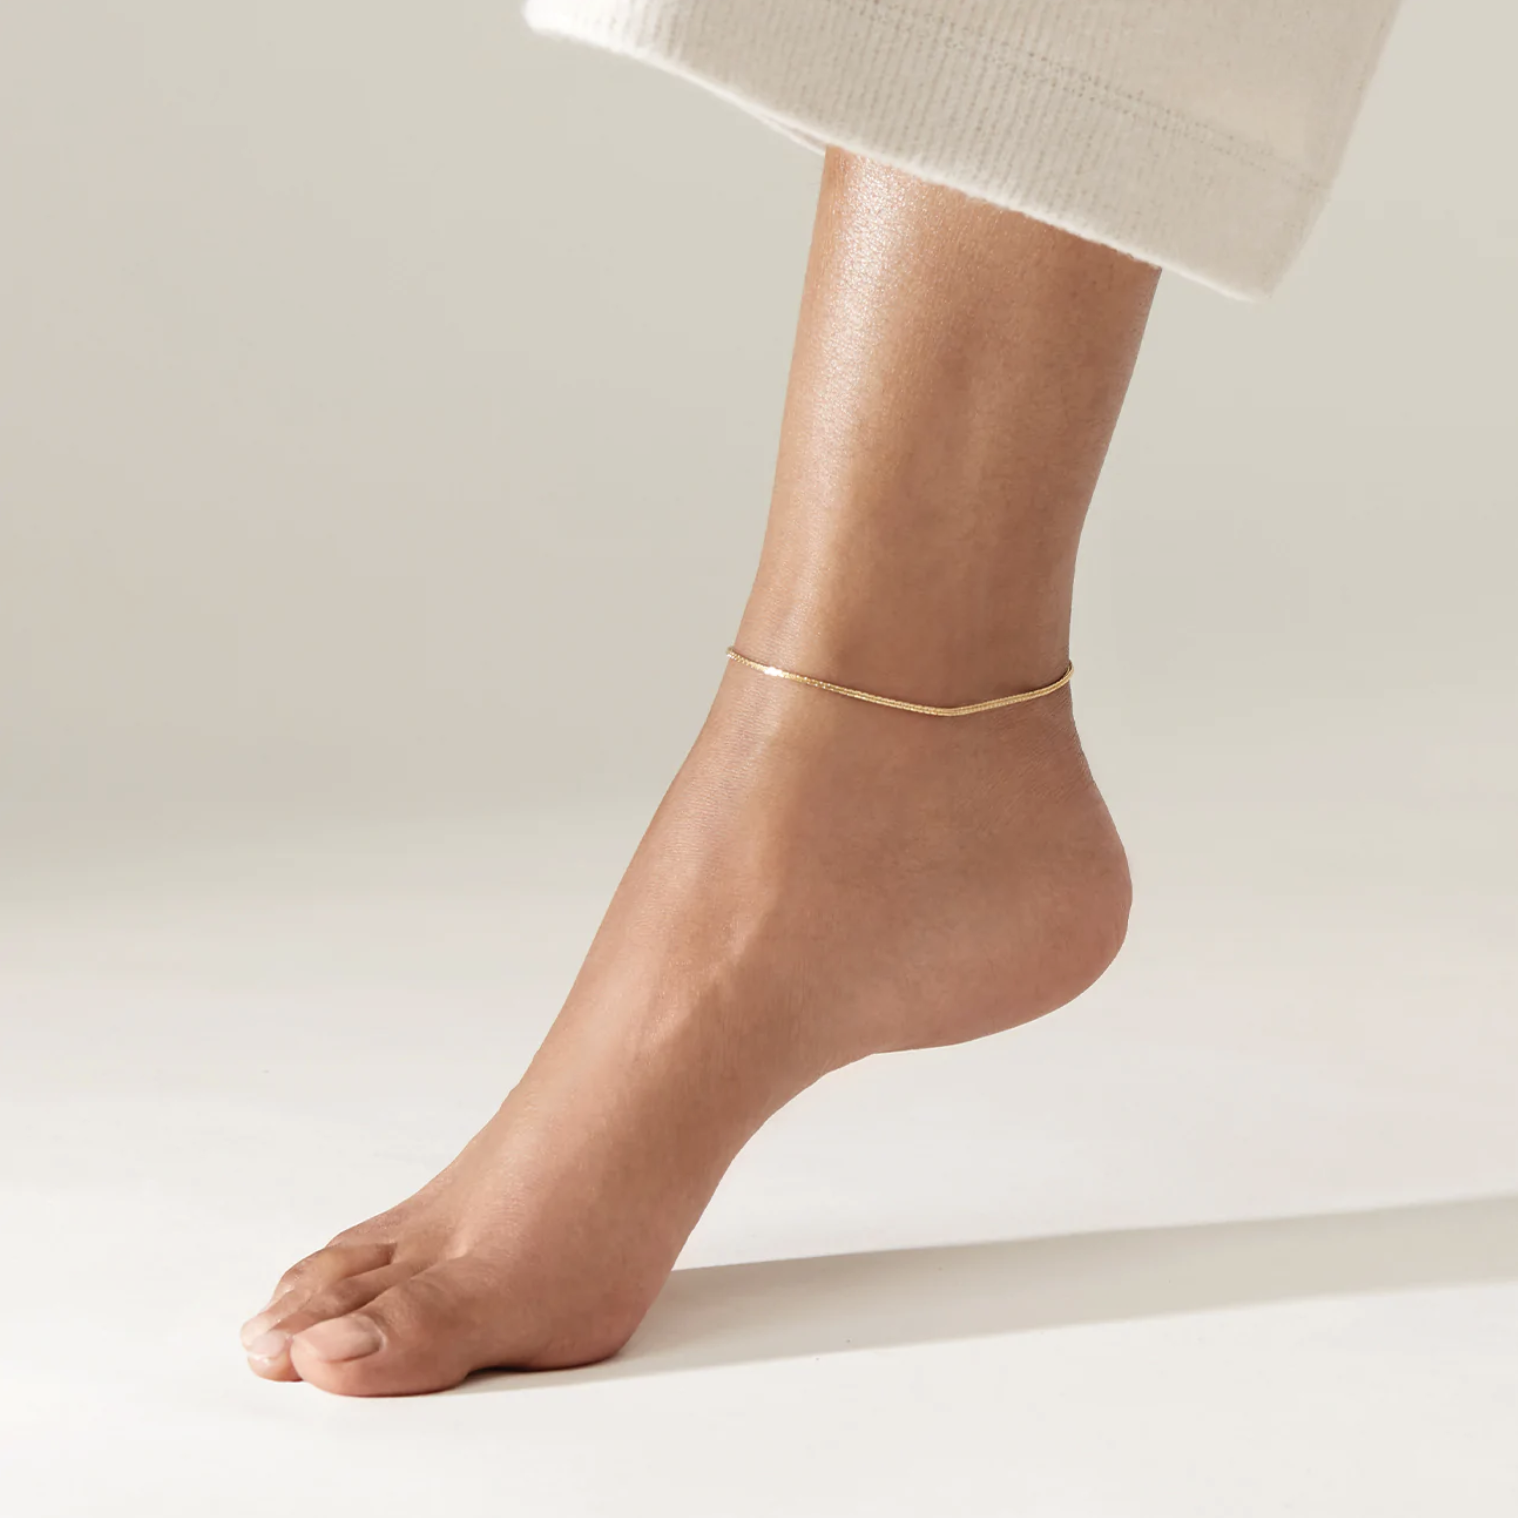 A person wearing cropped pants and the anklet